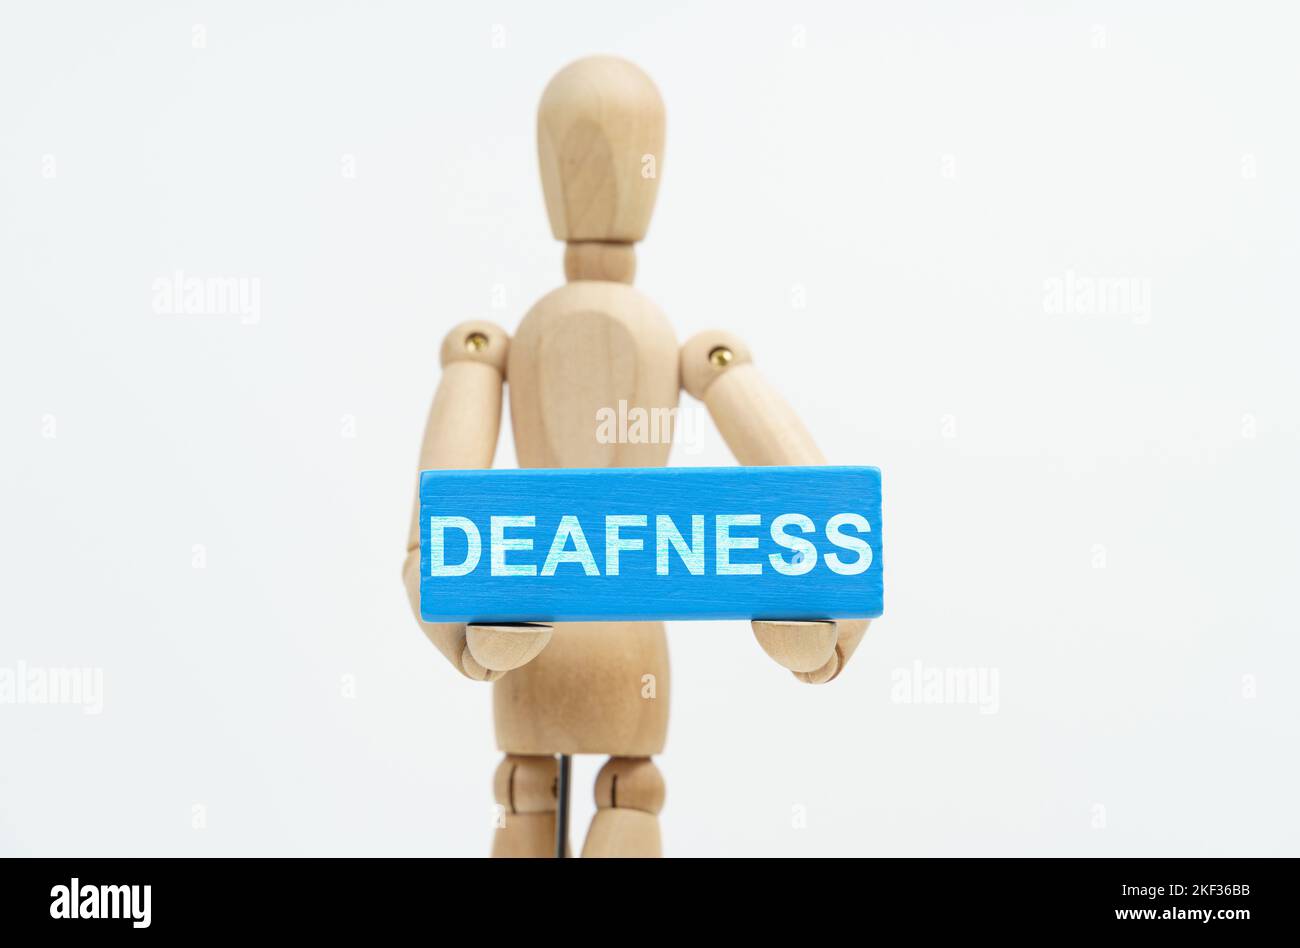 Medicine and healthcare concept. A figurine of a man holds in his hands a blue wooden block with the inscription DEAFNESS. The figurine is out of focu Stock Photo